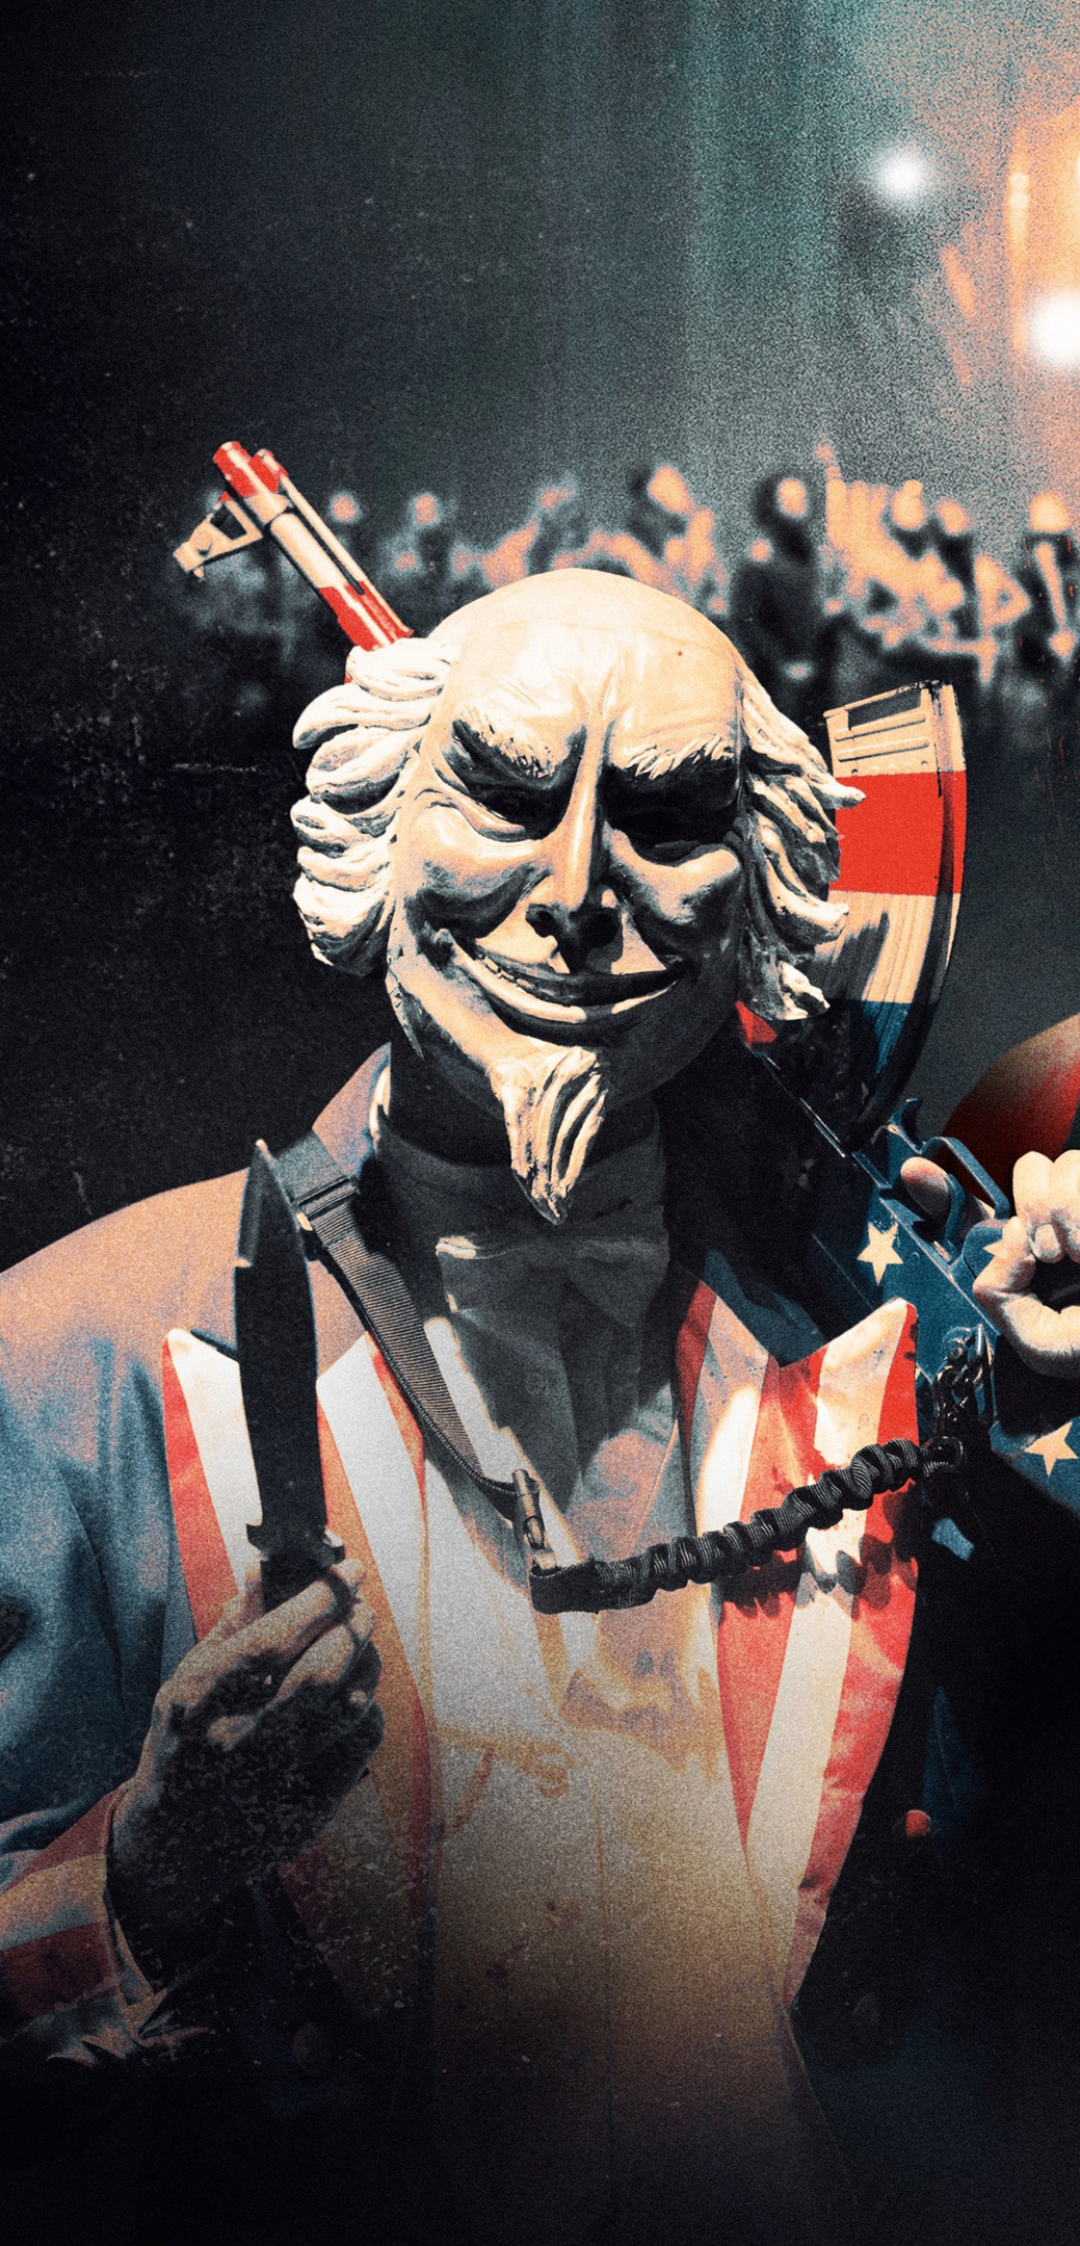 movie, the purge: election year phone wallpaper